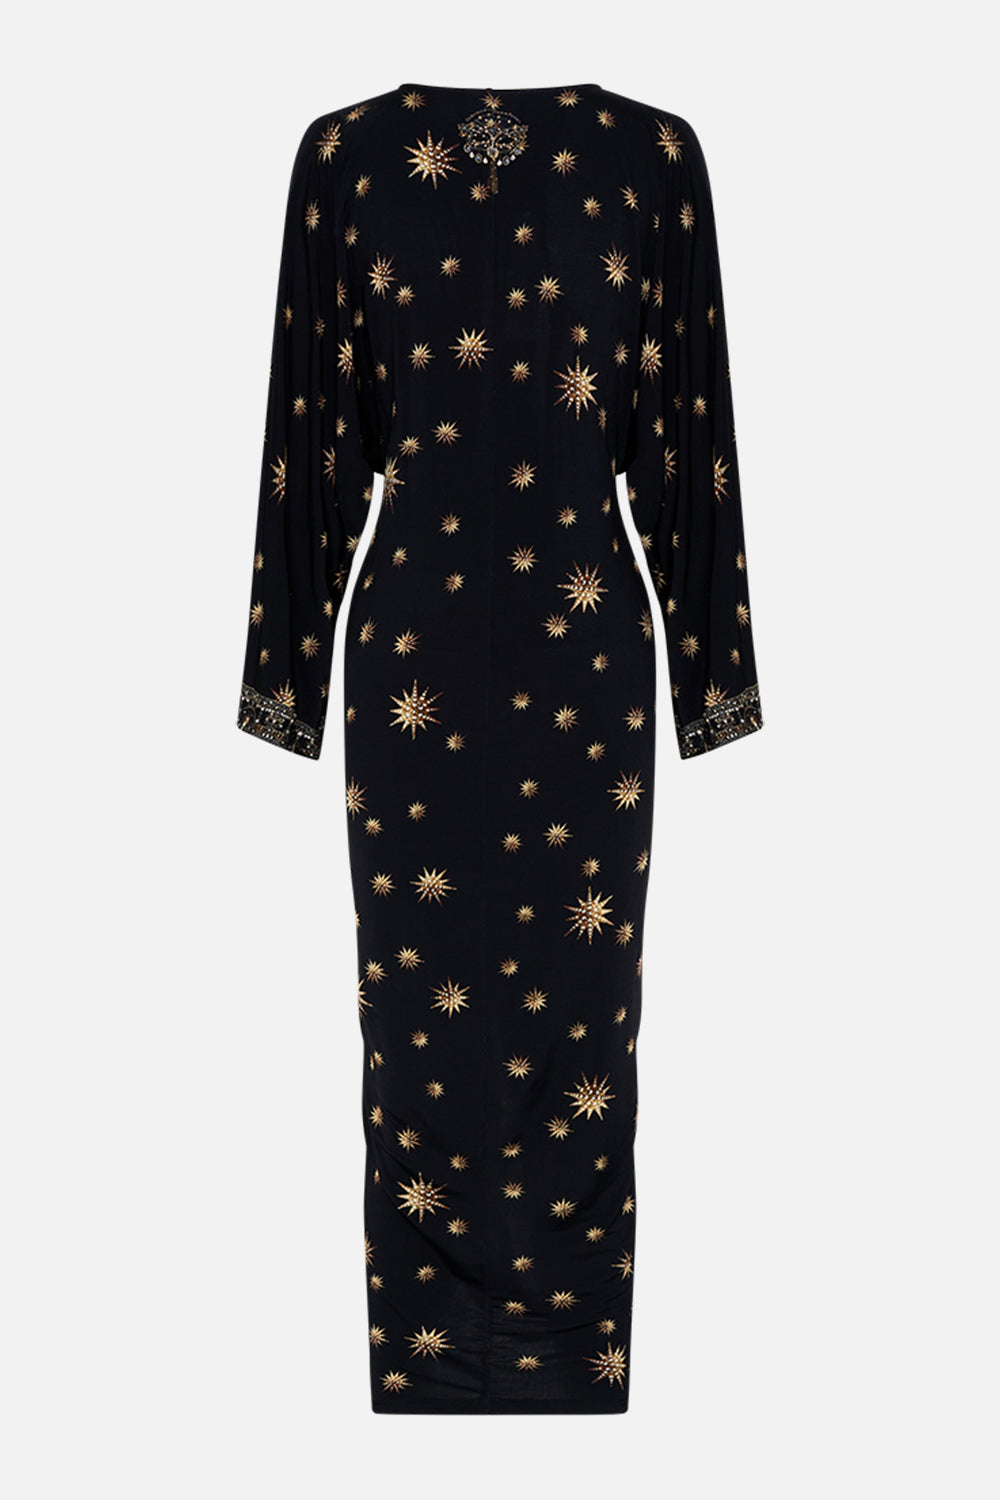 Product view of CAMILLA jersey dress in Soul of A Star Gazer print